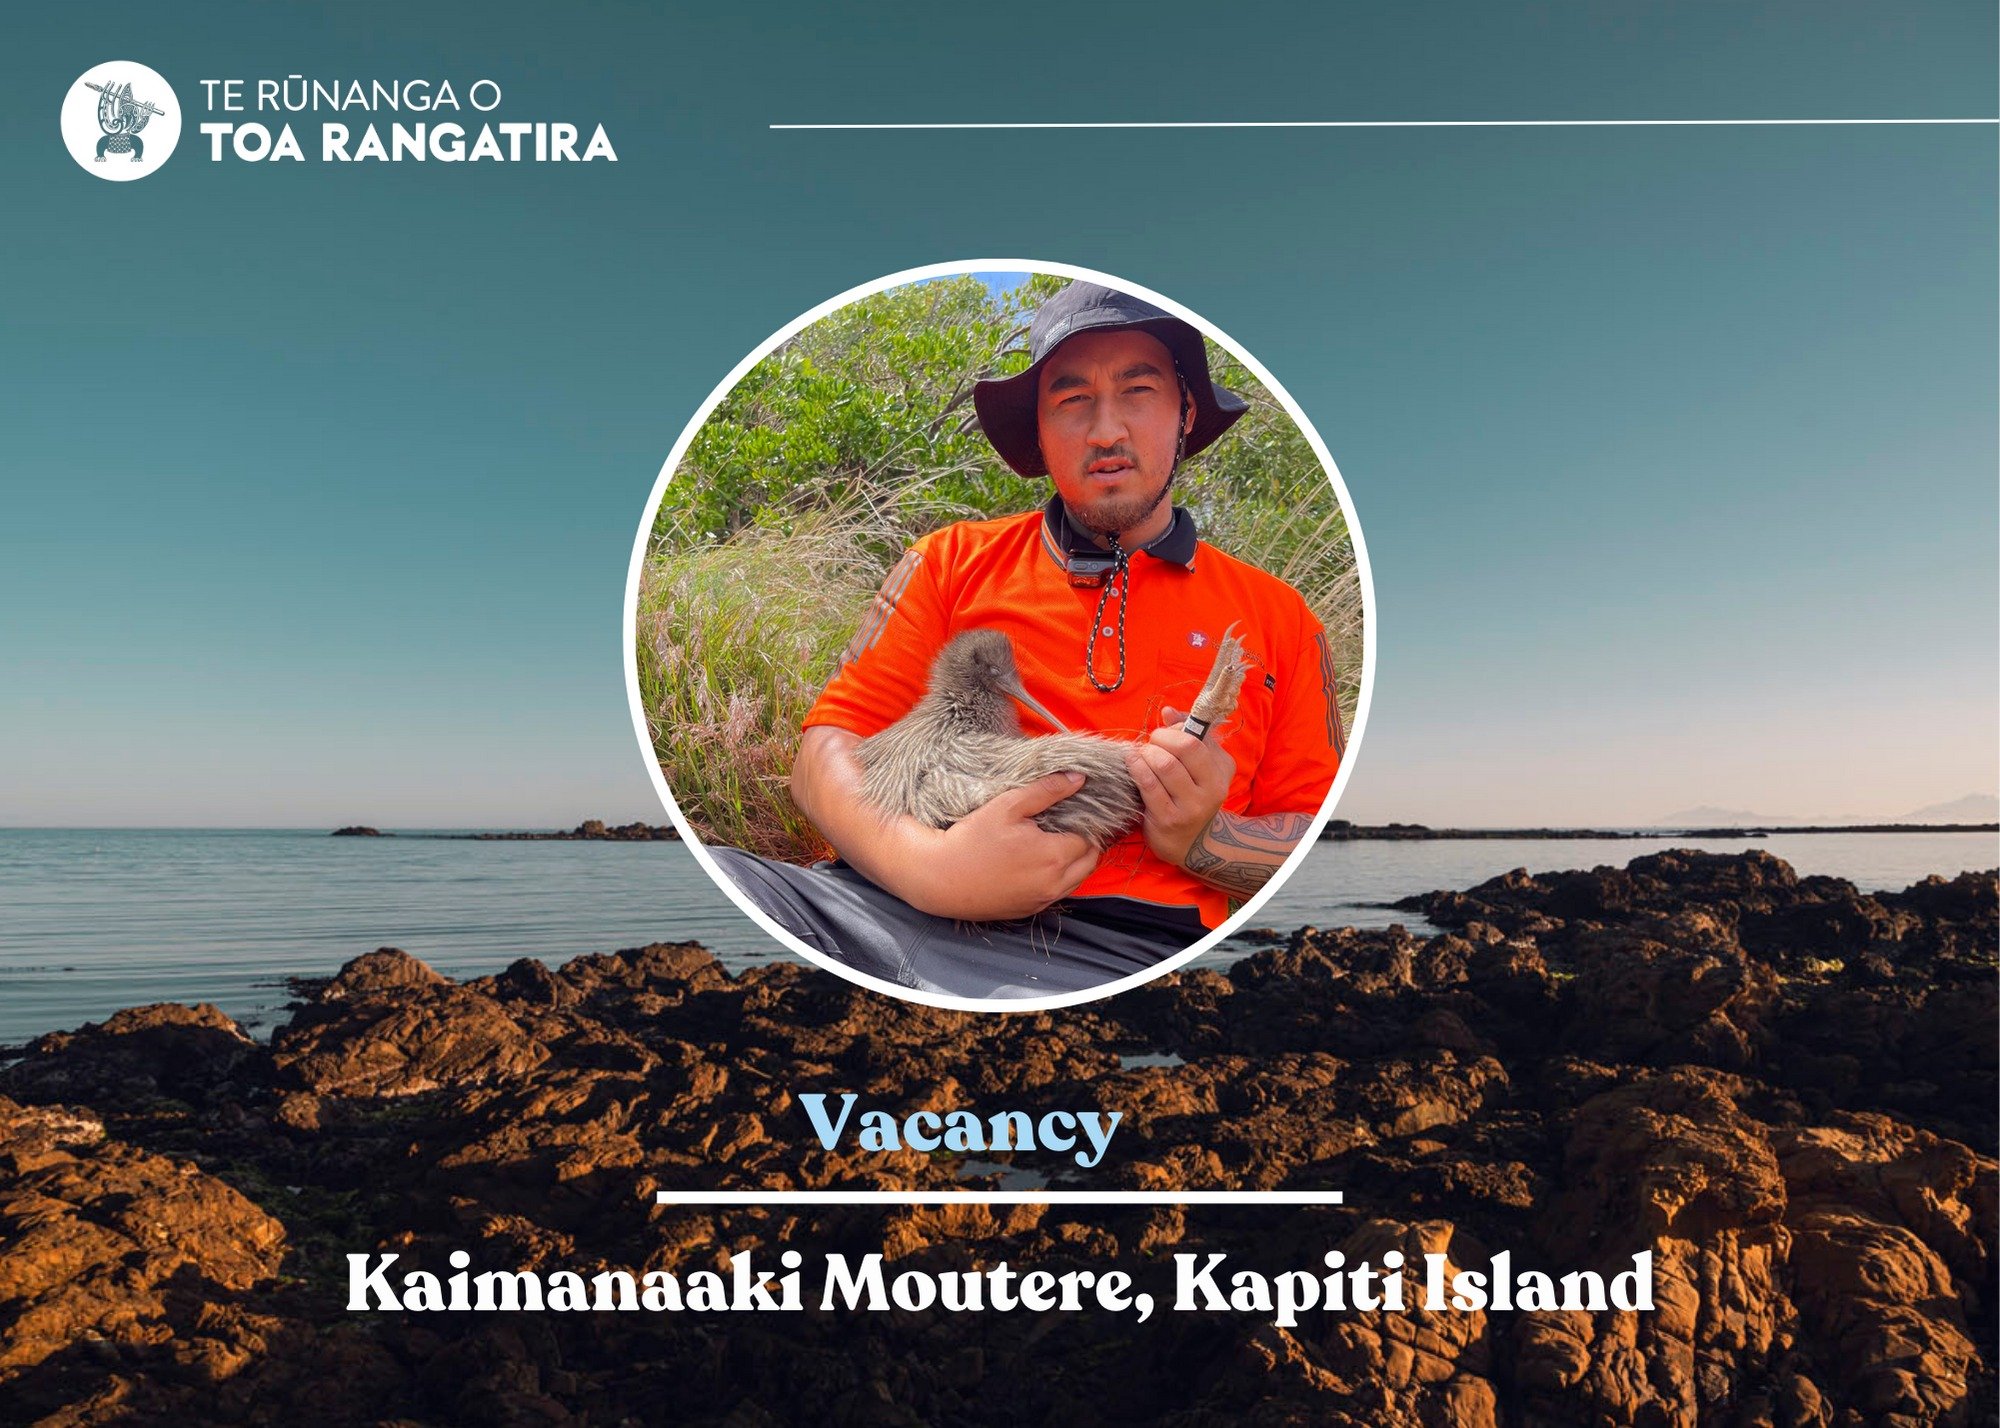 TONO MAI | KAIMANAAKI MOUTERE, KAPITI ISLAND

If roaming the hills behind your whare and spending endless days near the moana scouring the rockpools for sealife was your childhood, now it's time to get paid for it. 

The Kaimanaaki Moutere, Kapiti is